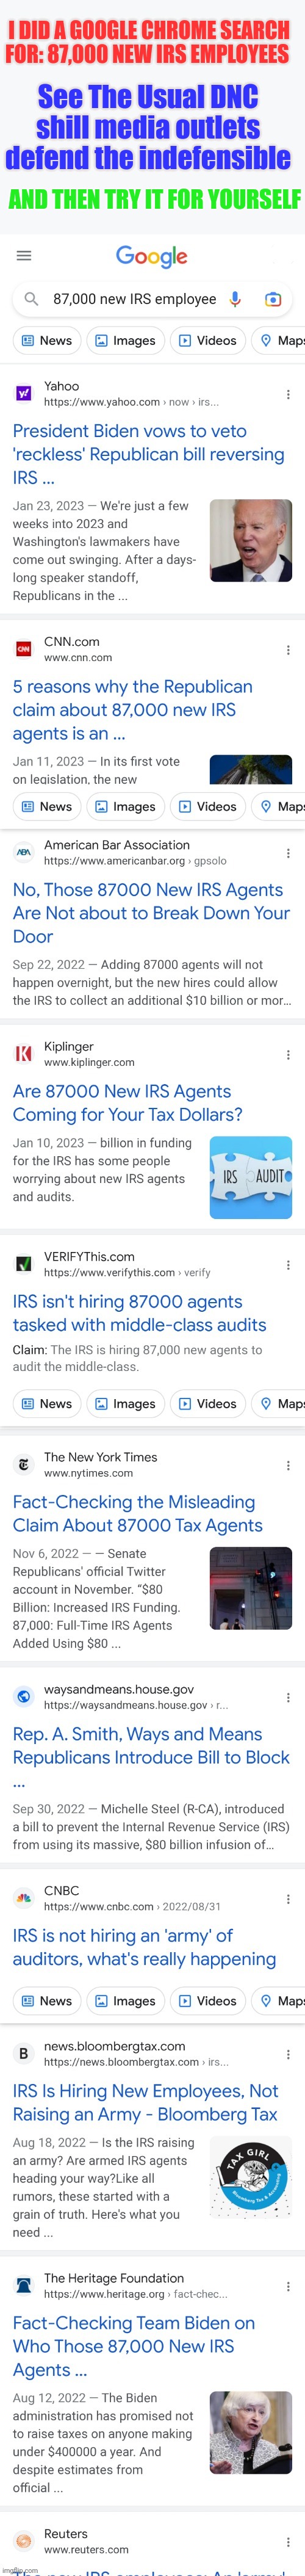 A media that wants to be perceived as honest, ethical and "for the people", does not rally around this story | I DID A GOOGLE CHROME SEARCH FOR: 87,000 NEW IRS EMPLOYEES; See The Usual DNC shill media outlets defend the indefensible; AND THEN TRY IT FOR YOURSELF | image tagged in irs,msm,dnc,inflation reduction act | made w/ Imgflip meme maker